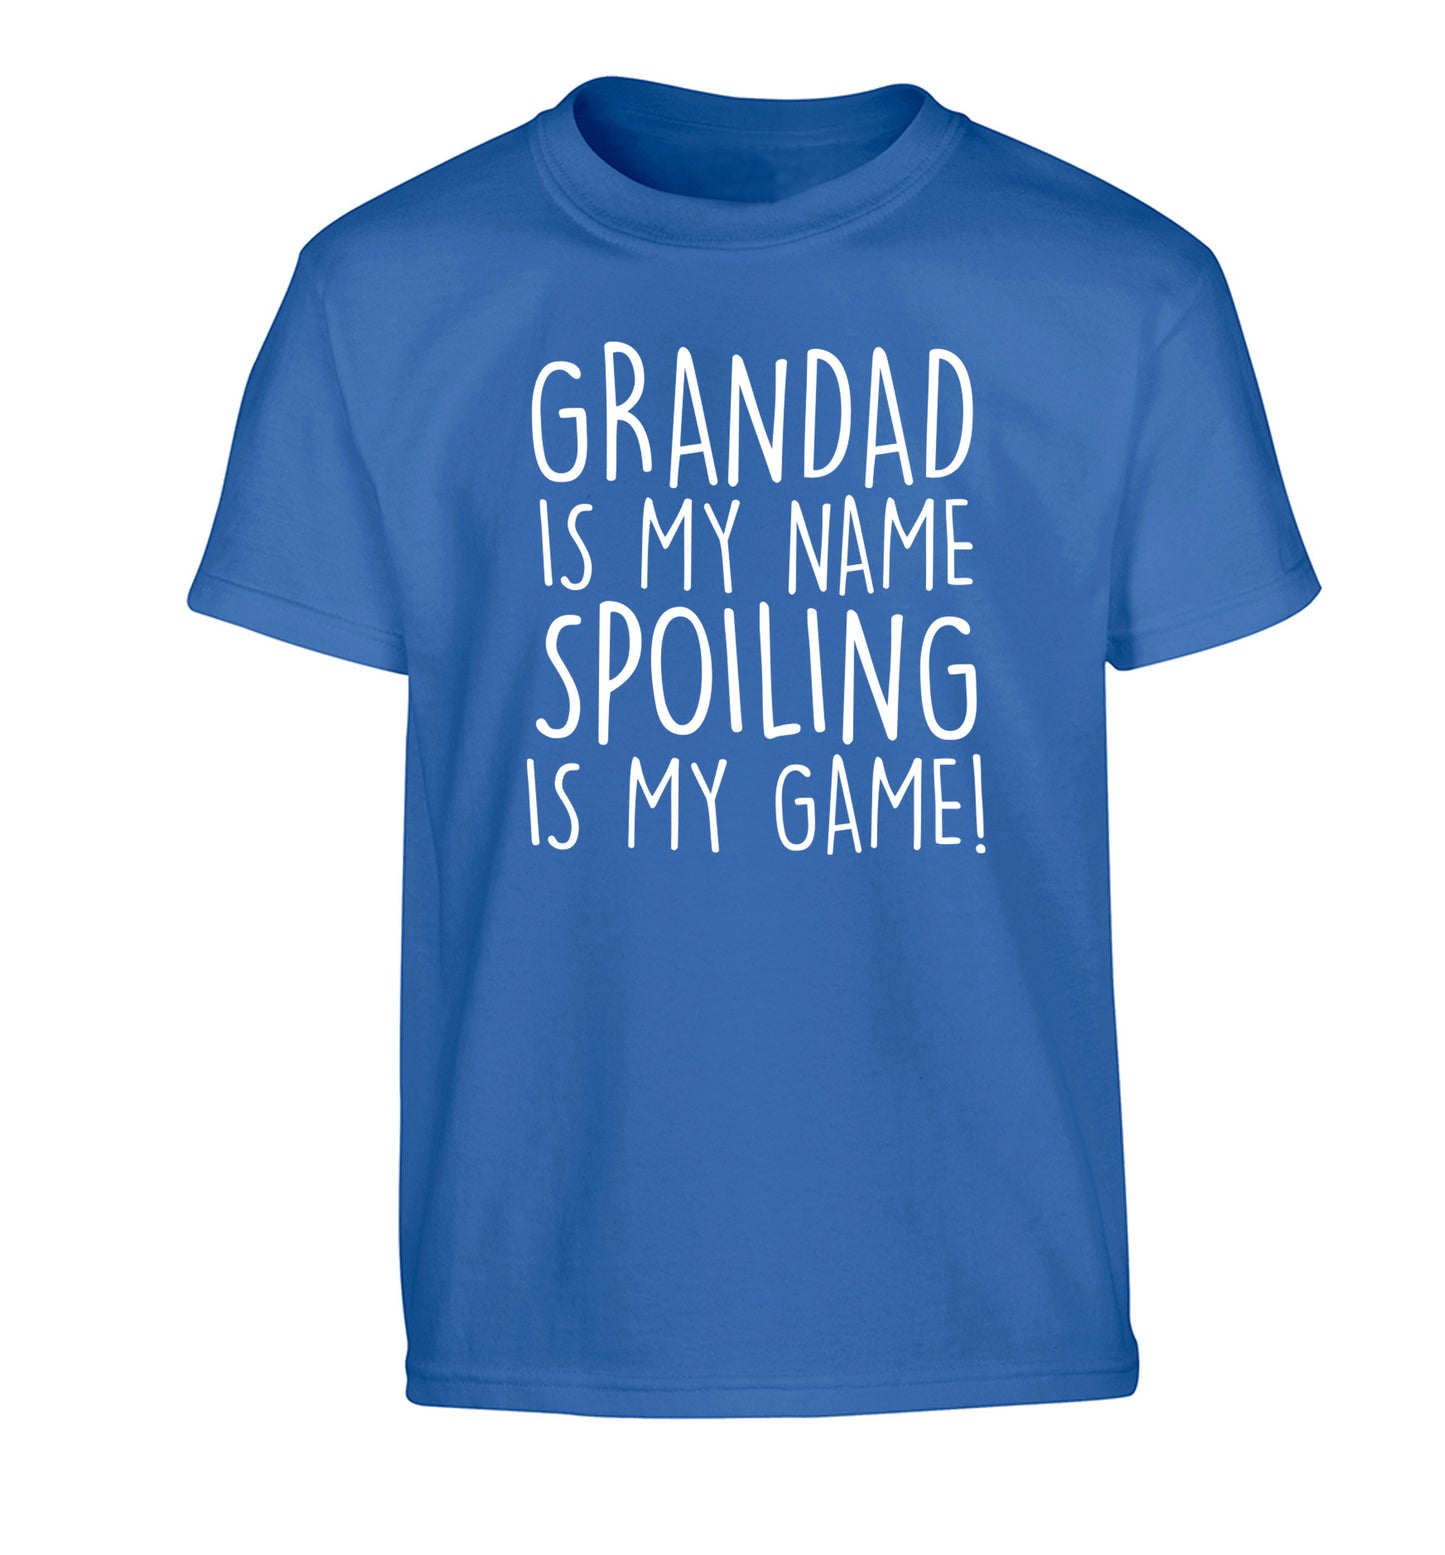 Grandad is my name, spoiling is my game Children's blue Tshirt 12-14 Years